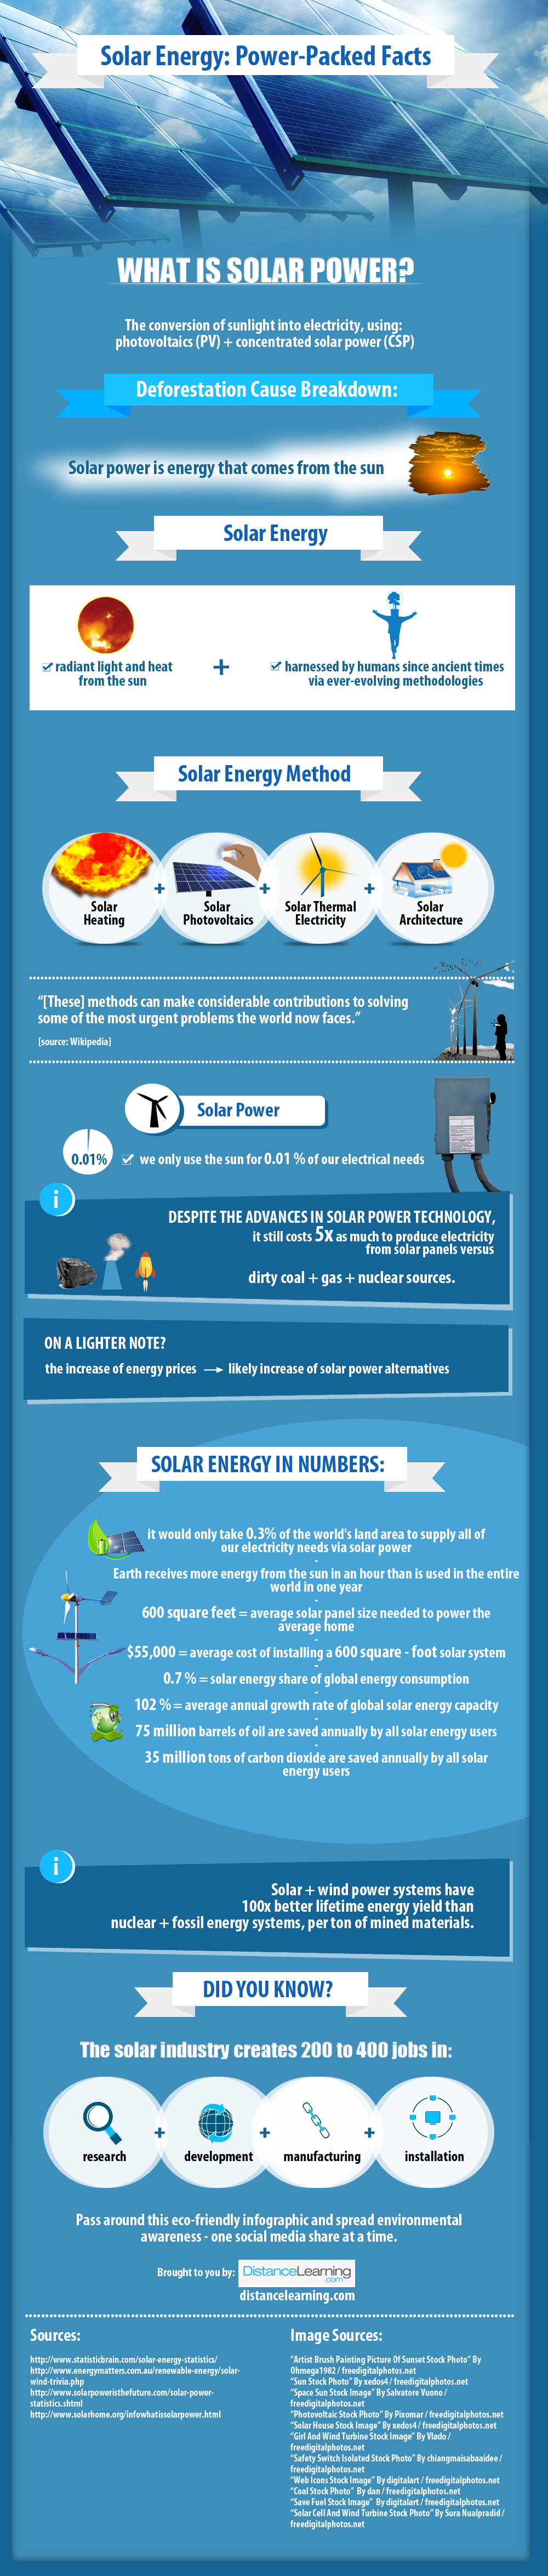 Solar Energy Facts and Statistics